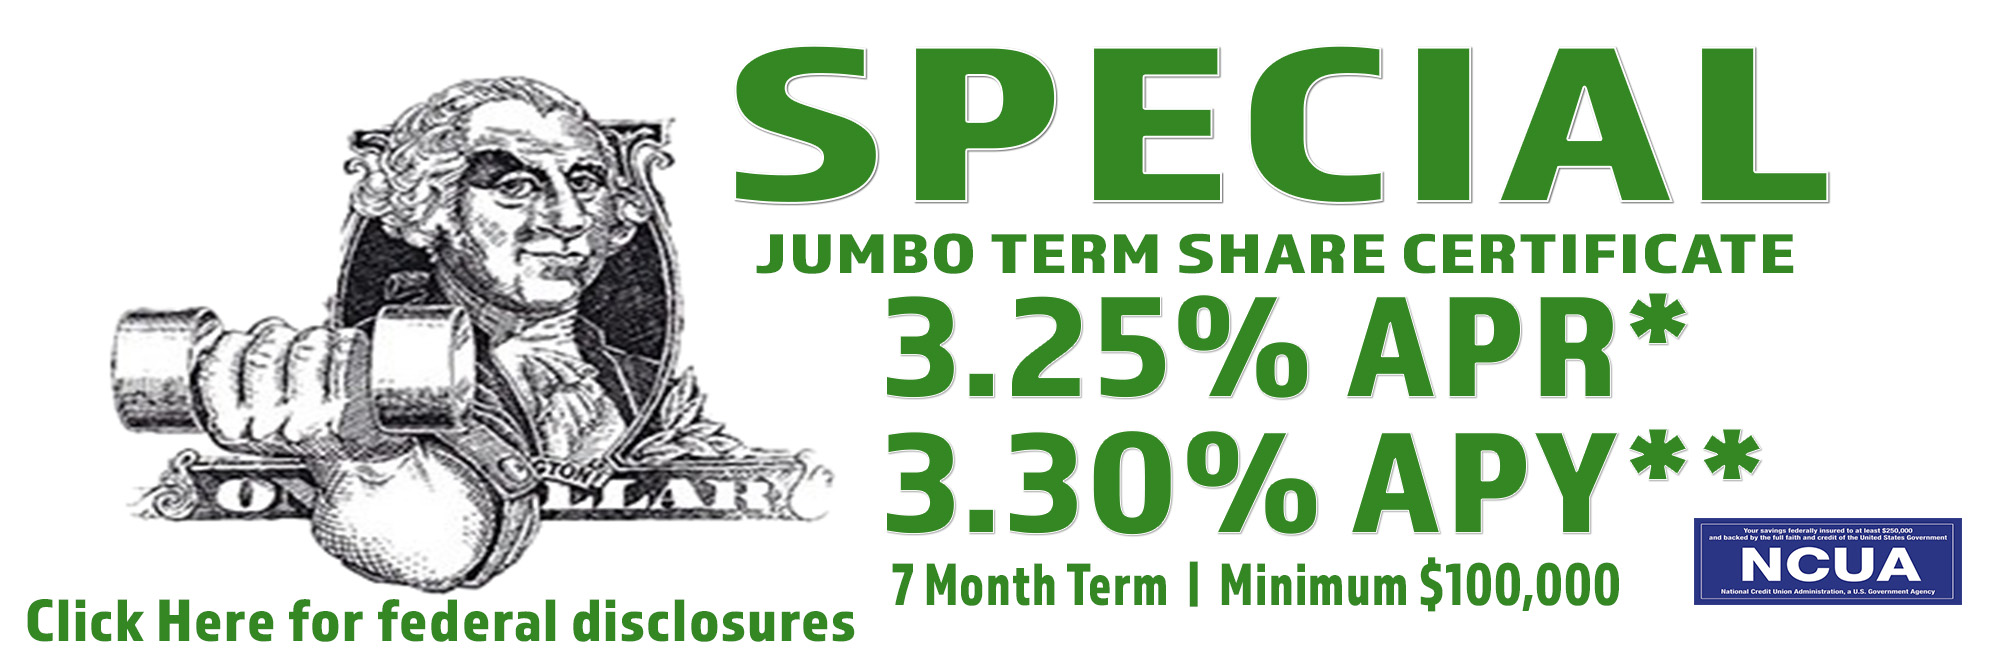 Jumbo Term Share Certificate Special